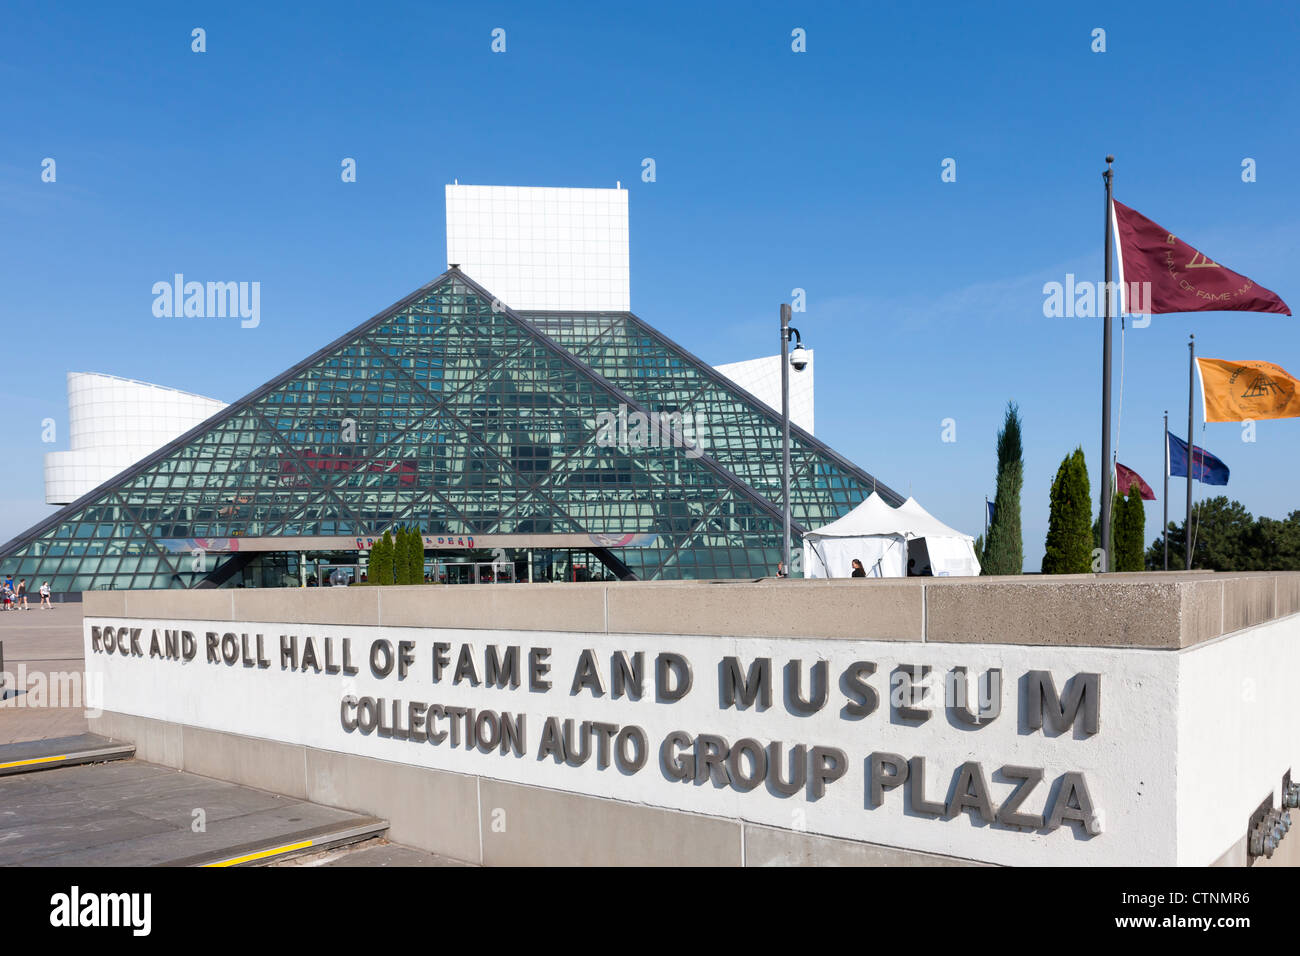 Die Rock And Roll Hall Of Fame in Cleveland, Ohio. Stockfoto